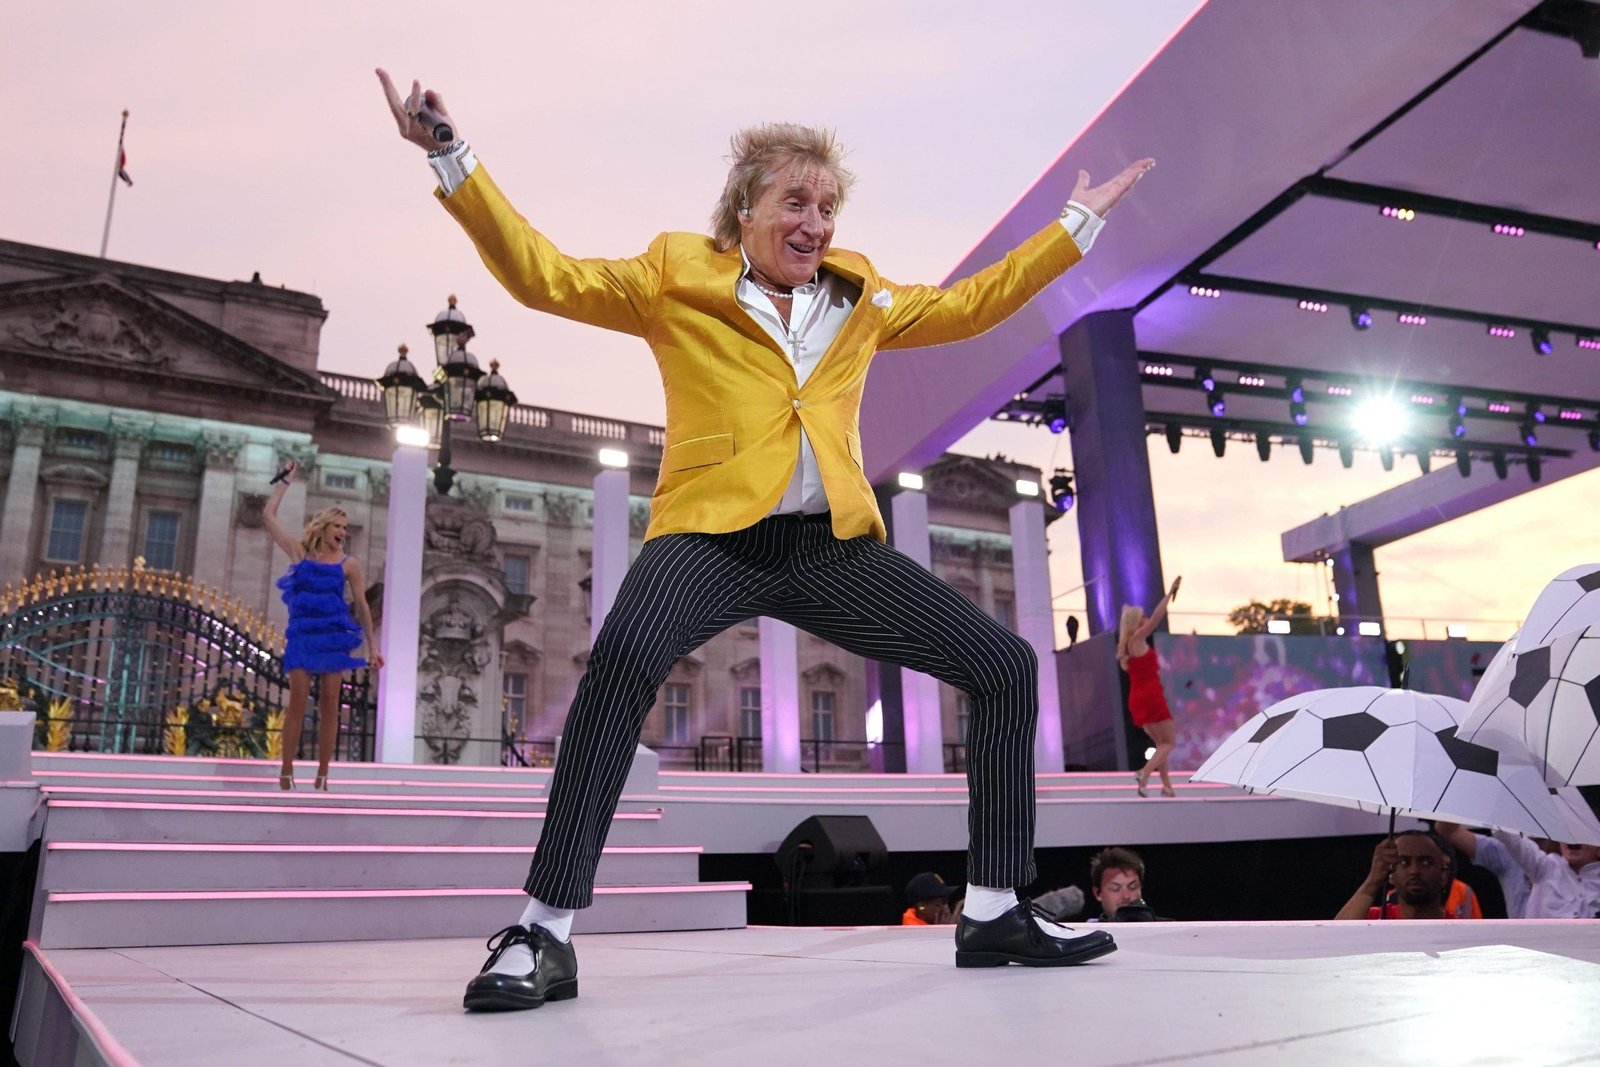 "Rock Legend Rod Stewart Set to Dazzle at Marbella's Starlite Festival 2023: A Debut - rod stewart scaled 1 - Local Events and Festivities -